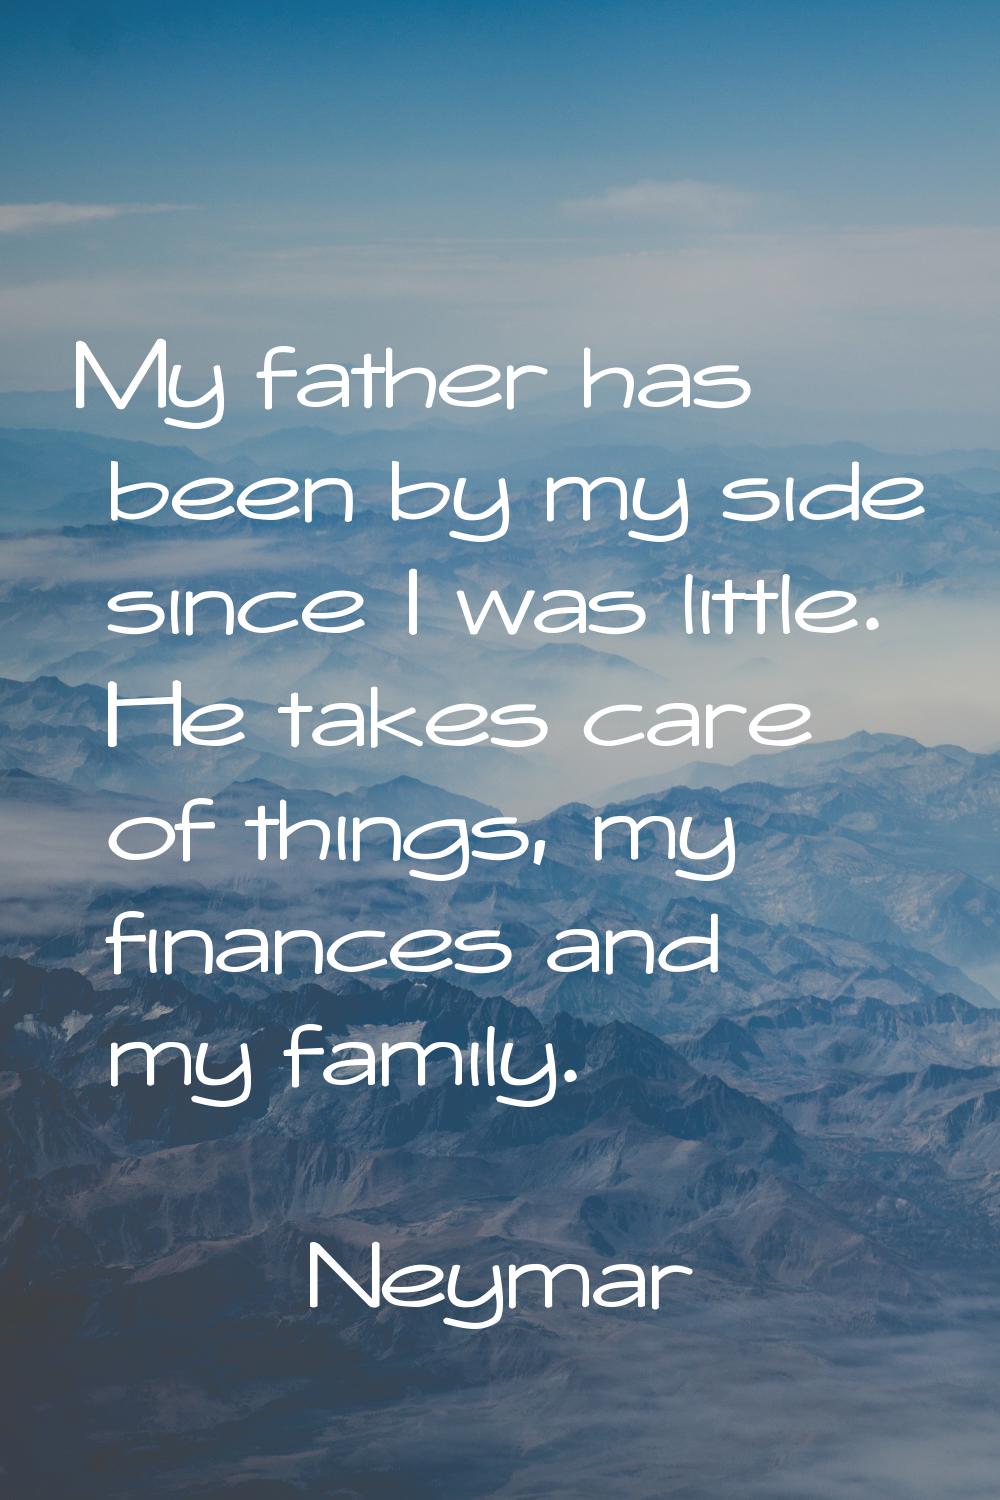 My father has been by my side since I was little. He takes care of things, my finances and my famil